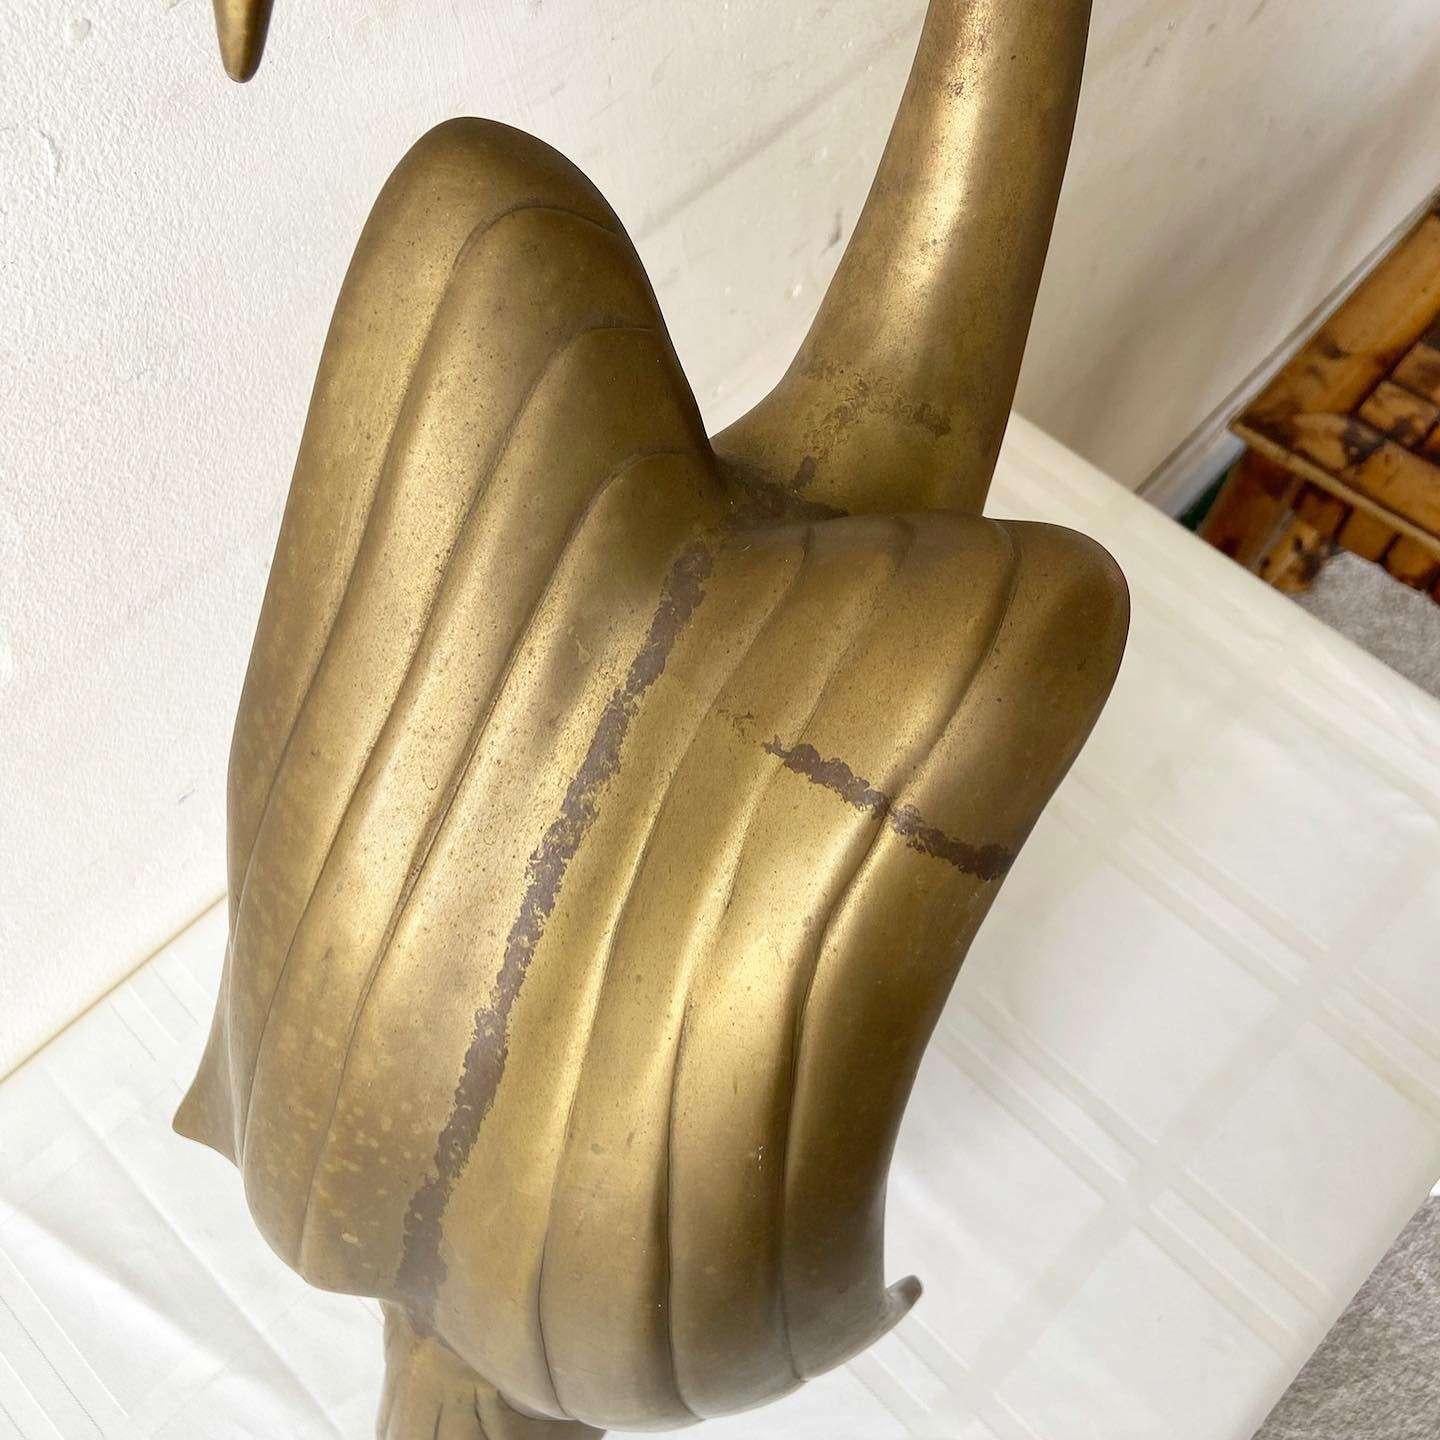 Exceptional mid century modern brass swan sculptor by Dara International, dated 1983. Displays a swan parting its wings.
